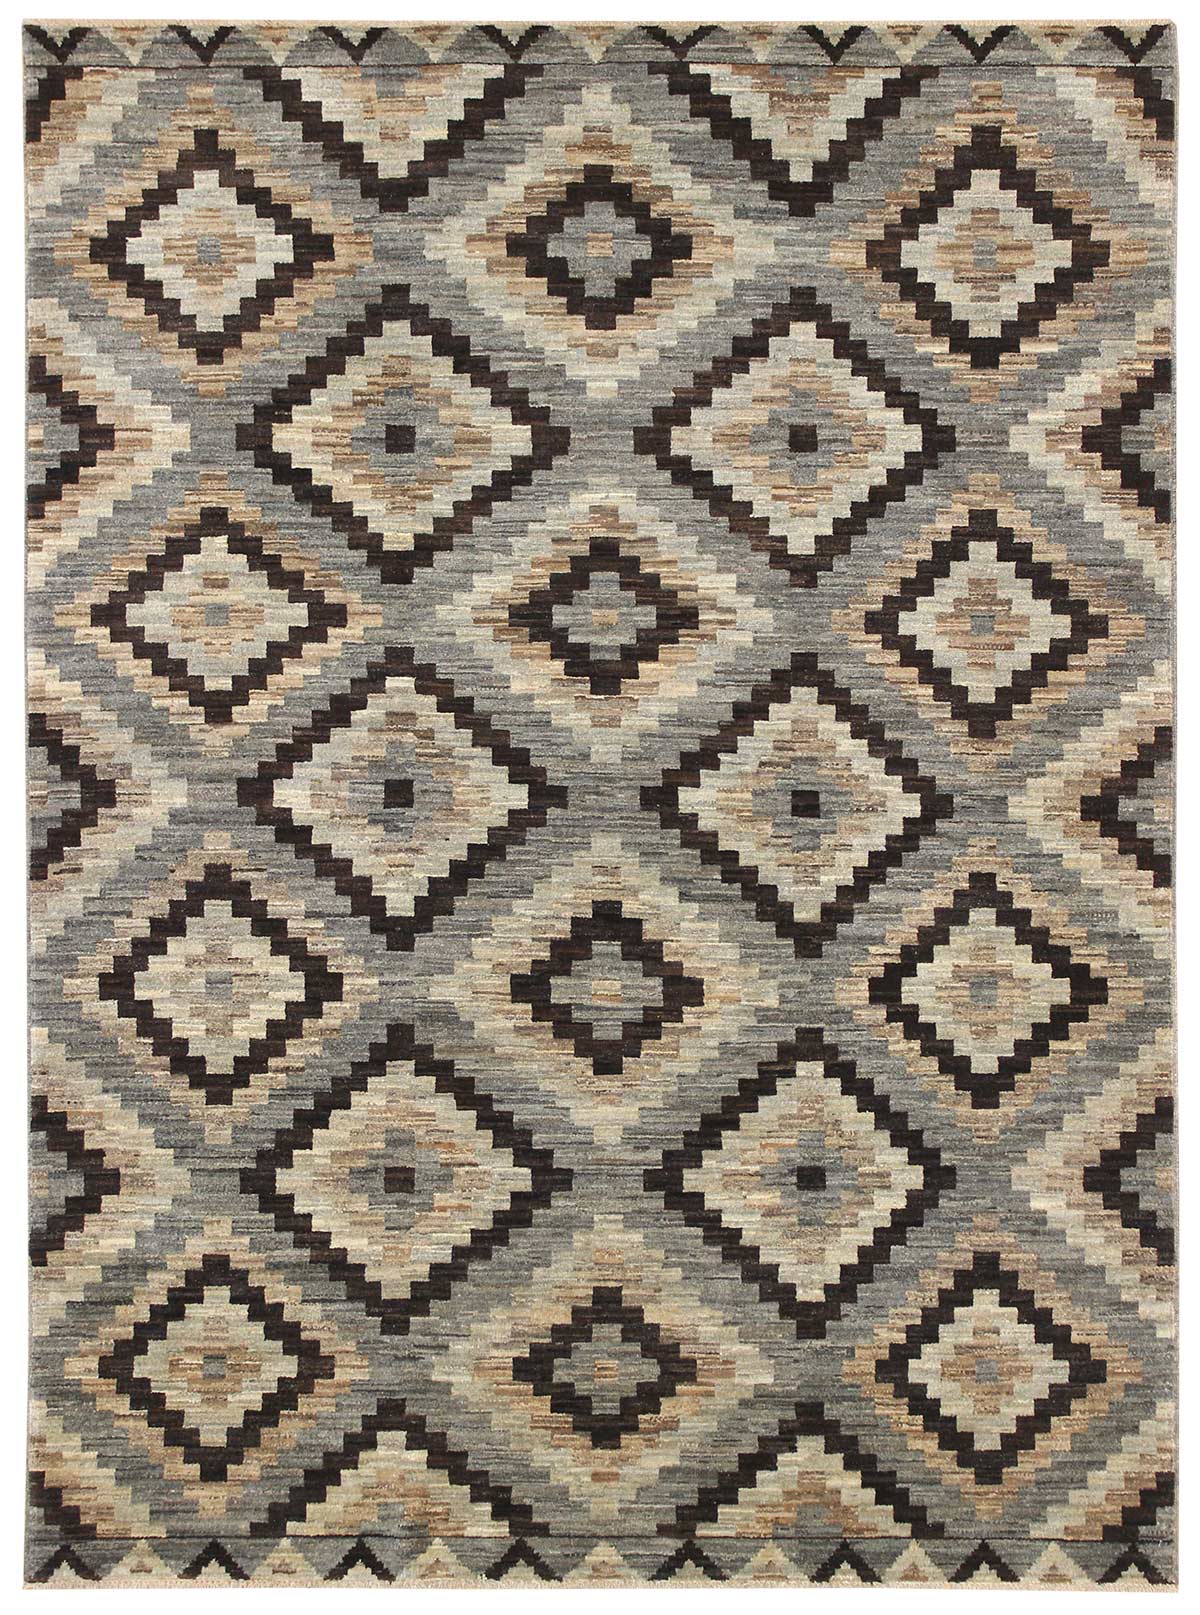 South West Handwoven Transitional Rug